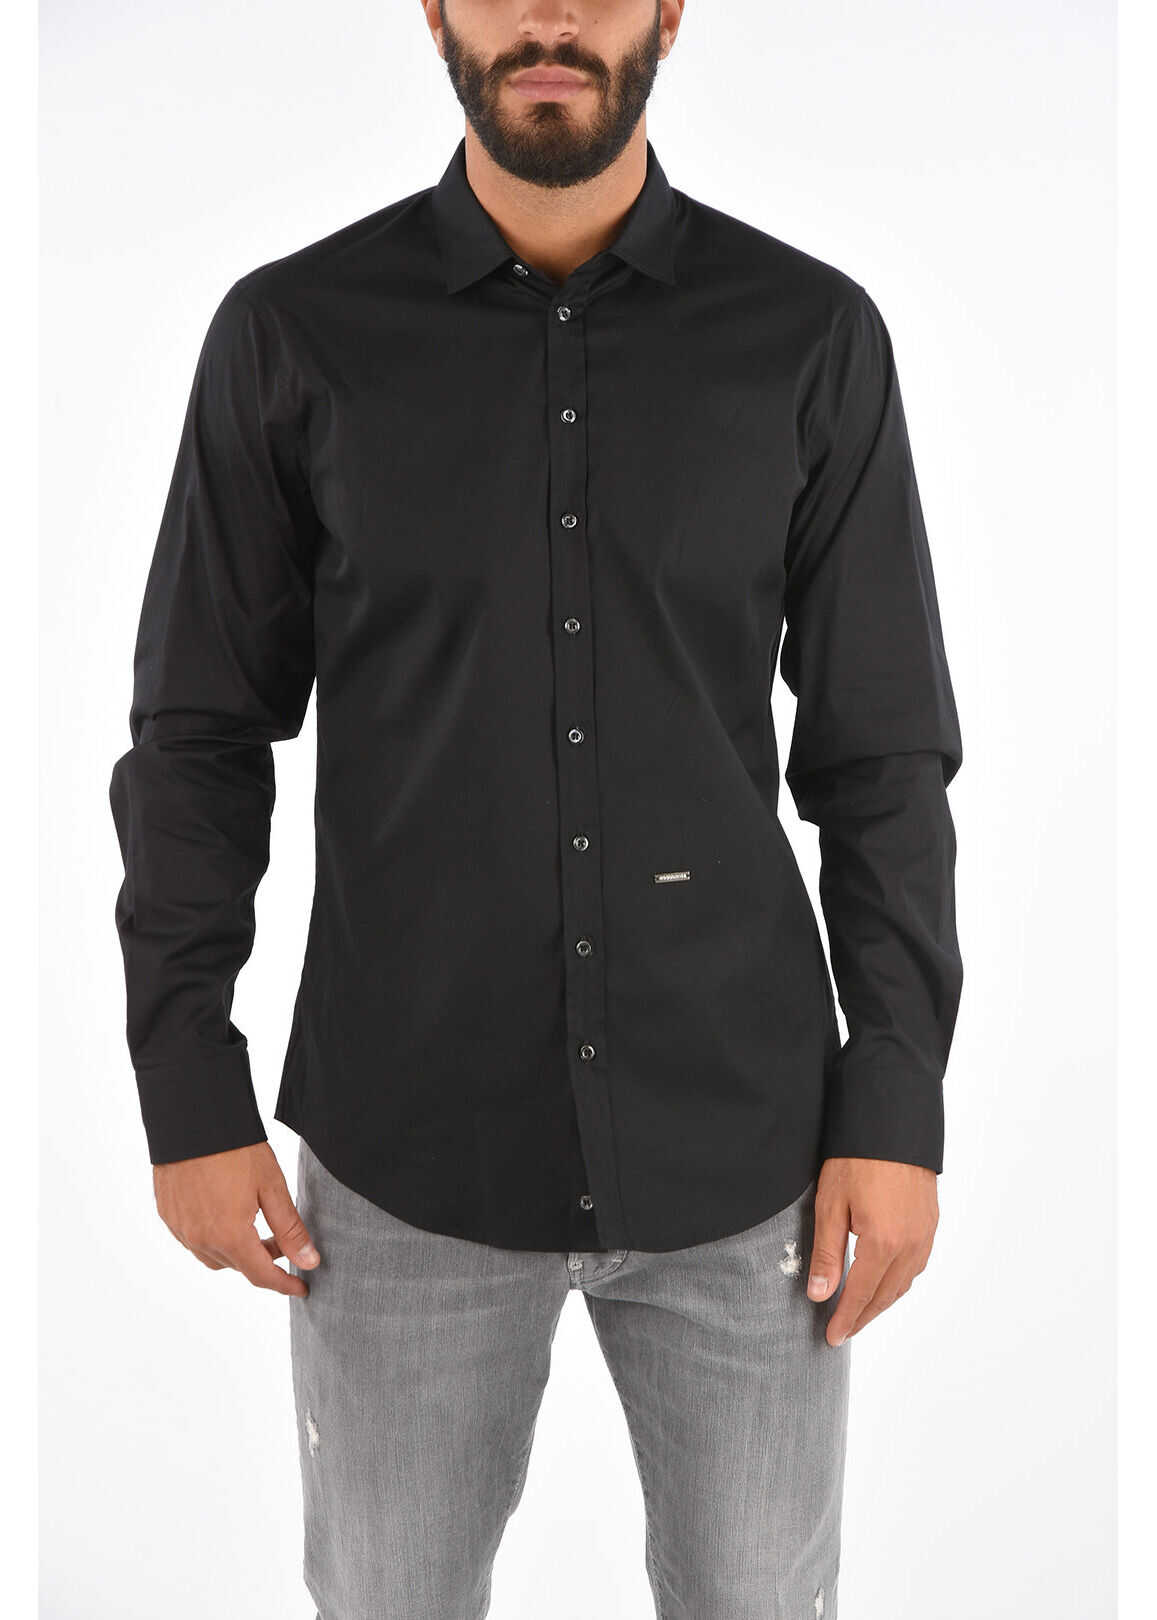 DSQUARED2 Stretchy Cotton Spread Collar Shirt Black